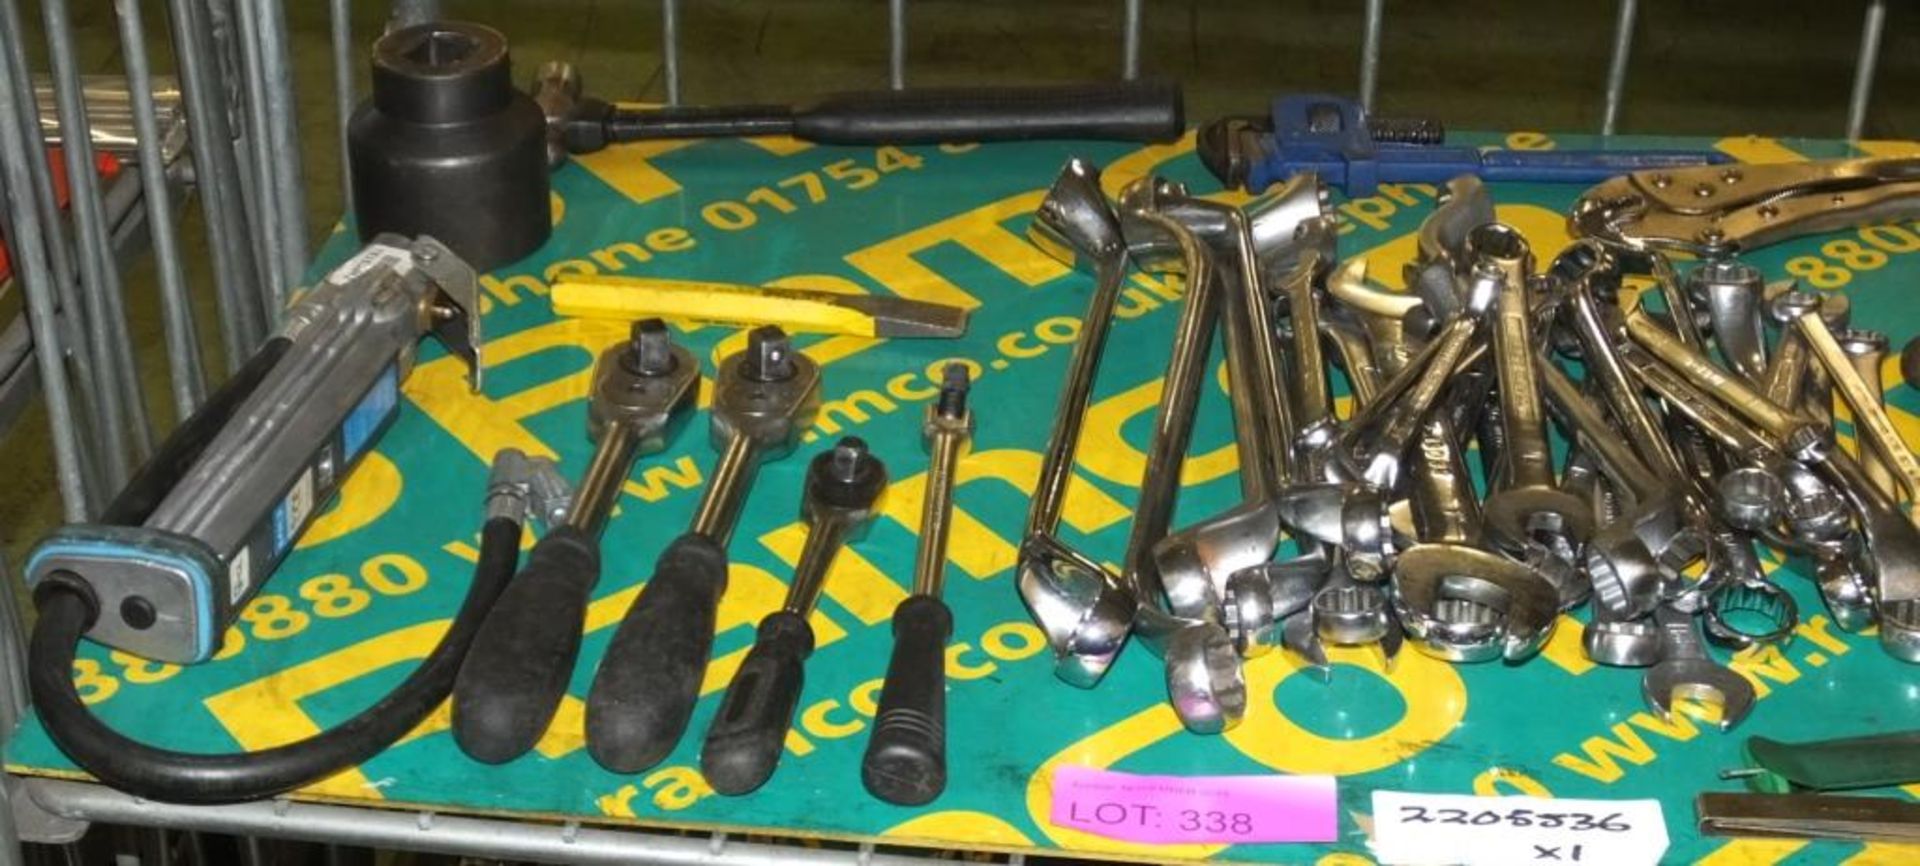 Various Hand Tools - Hammer, Sockets, Spanners, Wrenches - Image 2 of 3